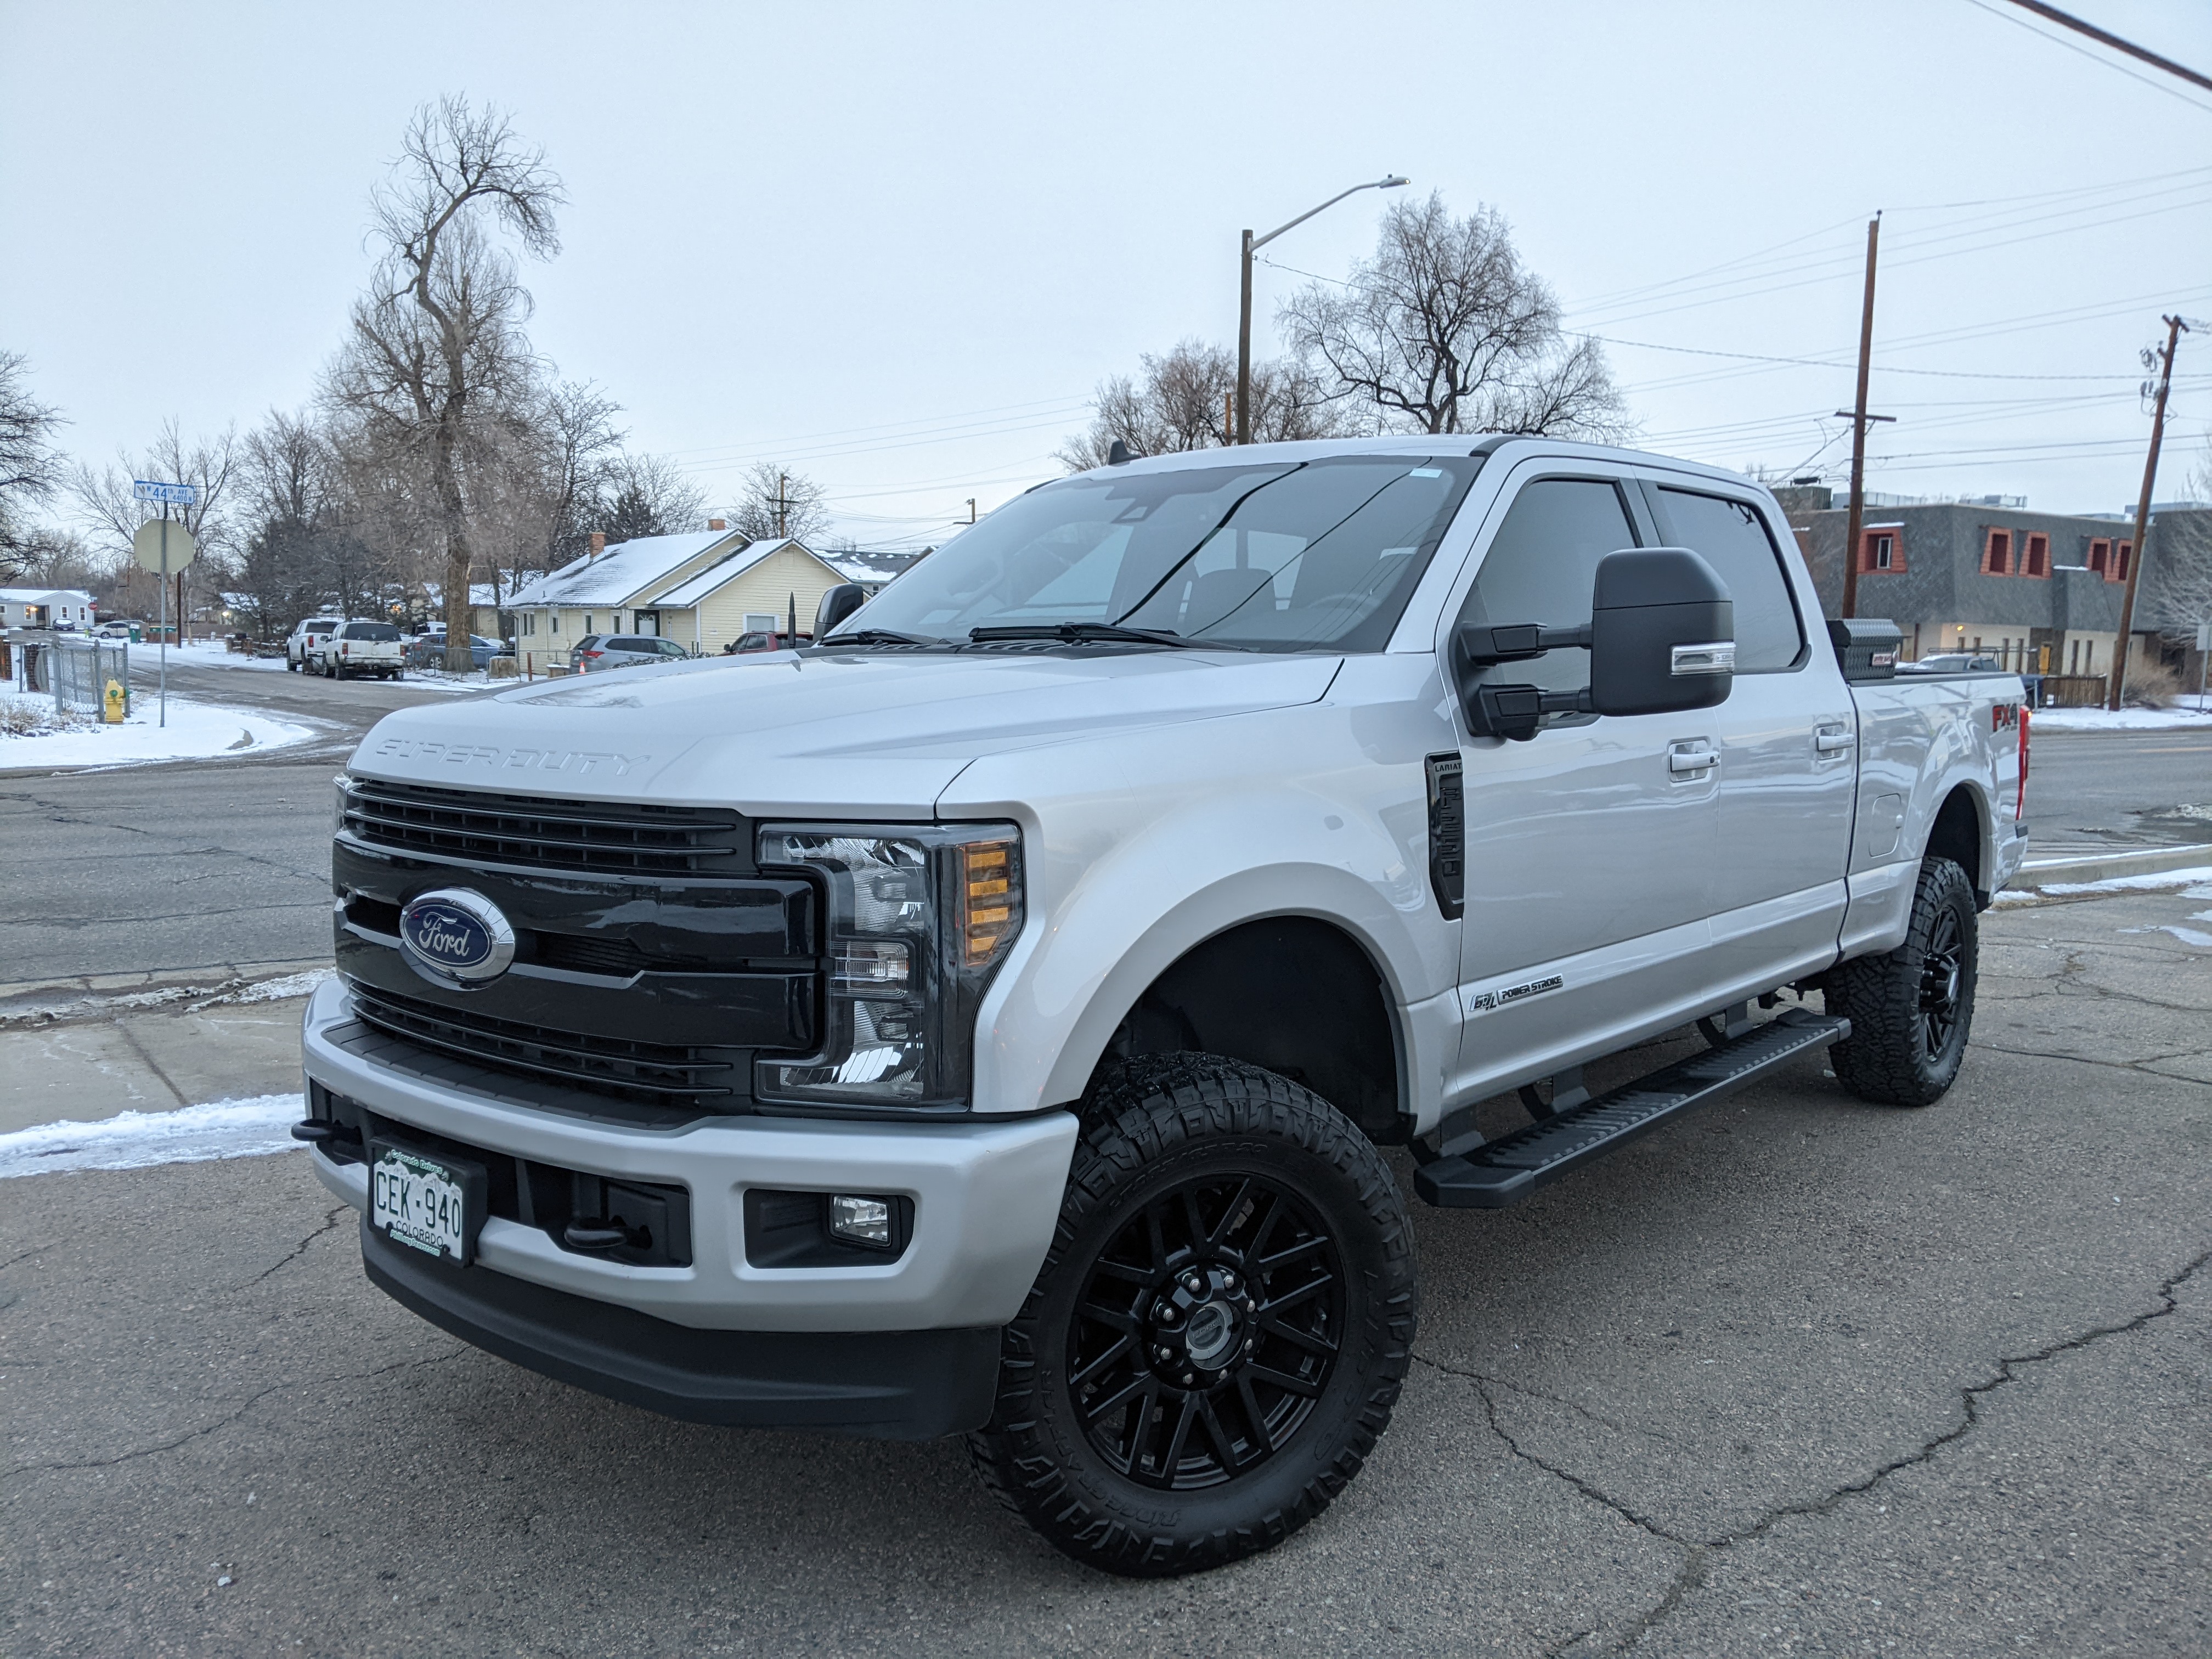 2019 Ford F-250 finished product.